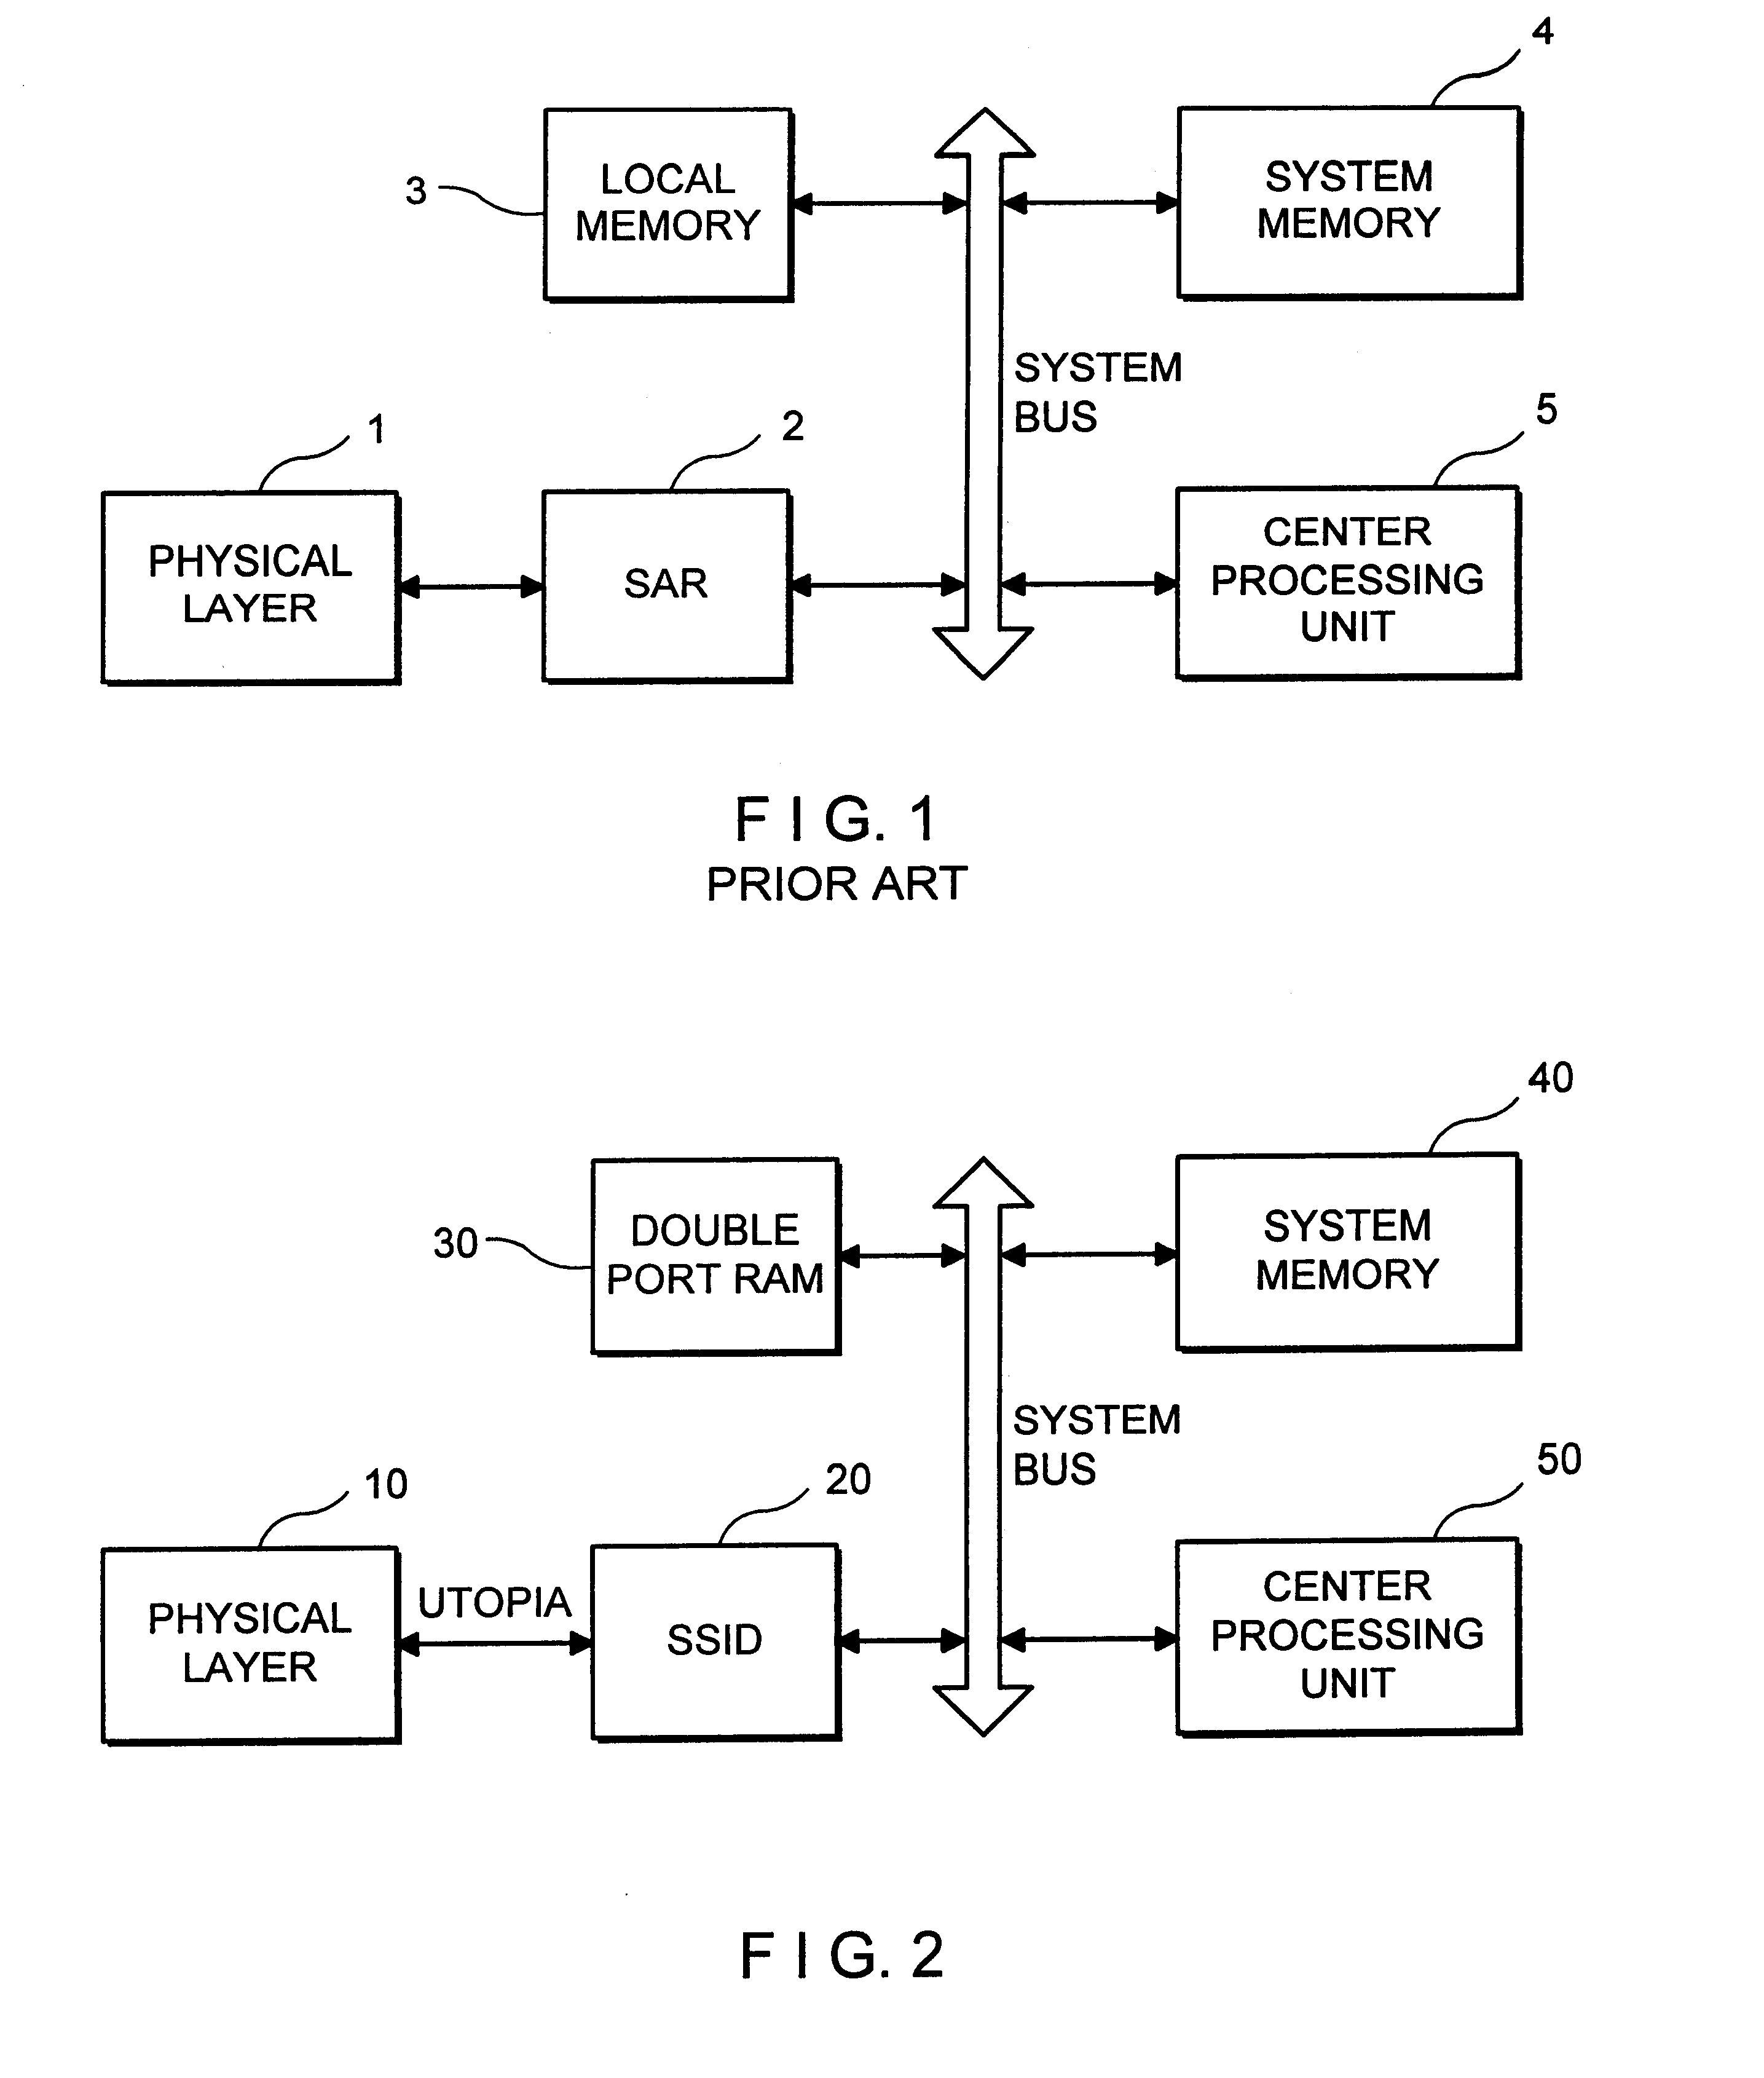 Asynchronous transfer mode adaptation layer (AAL) processing method